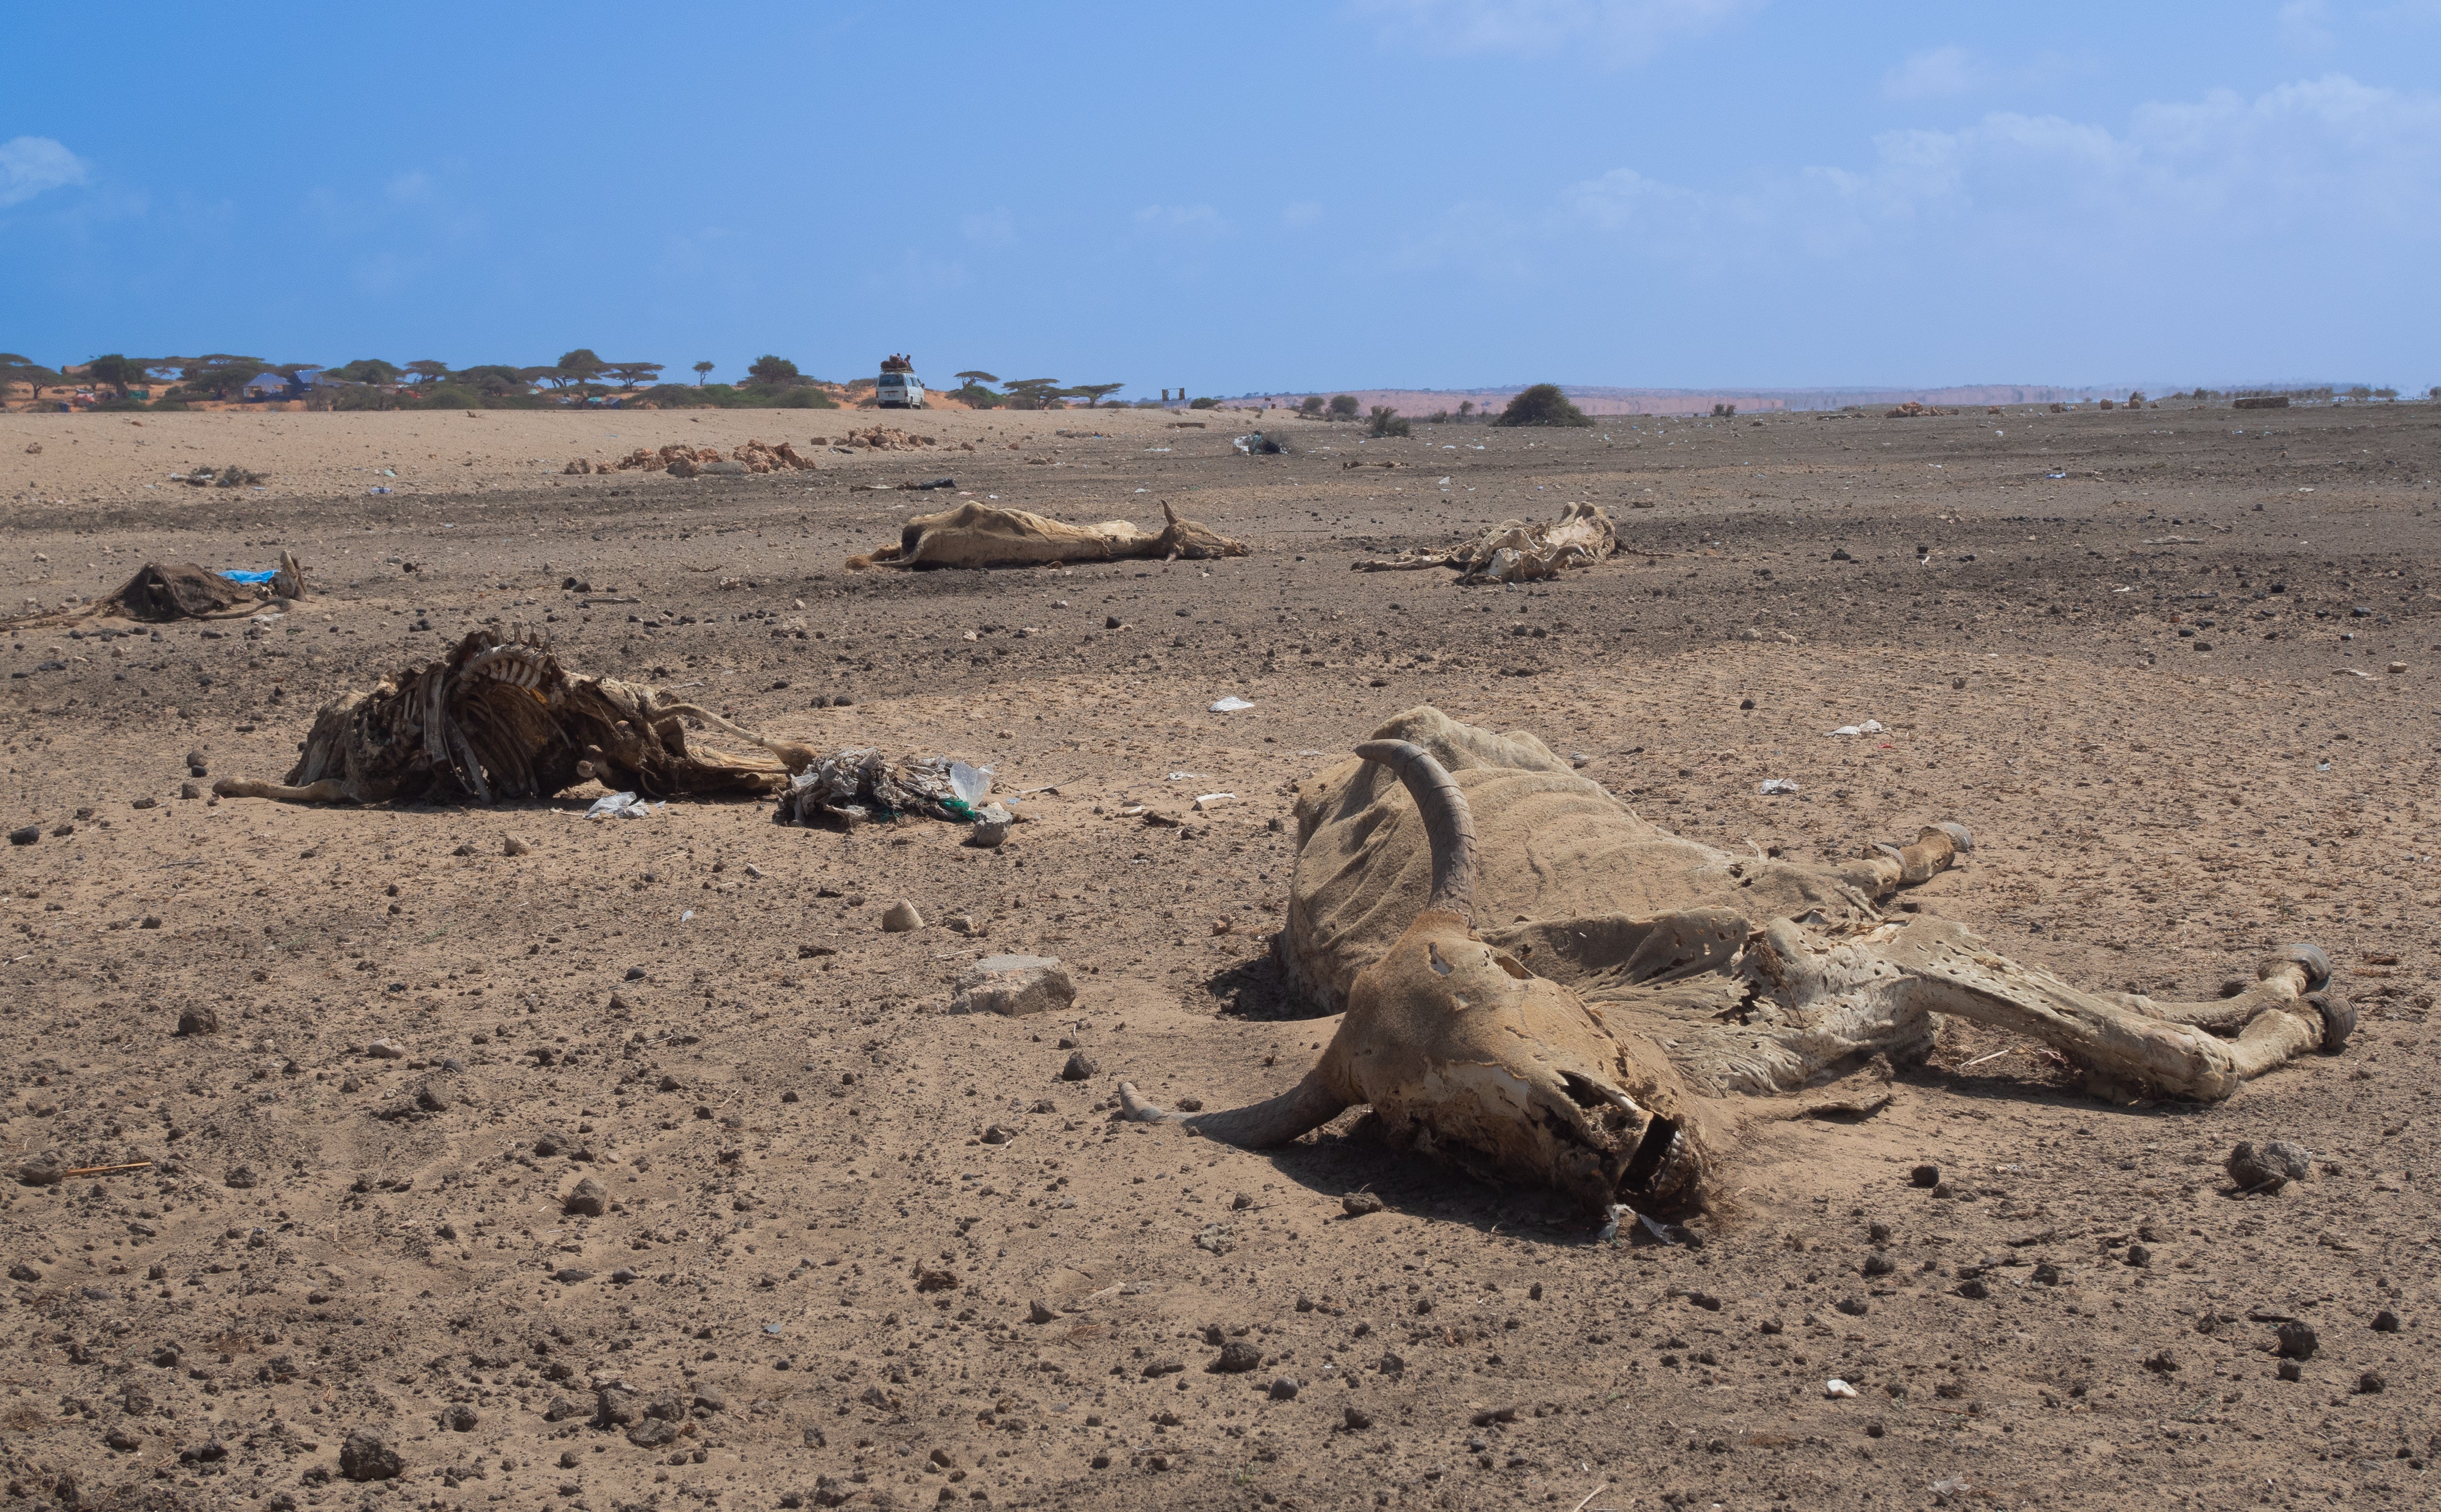 Hundreds of thousands of animals have been killed by the drought in Somalia, destroying livelihoods